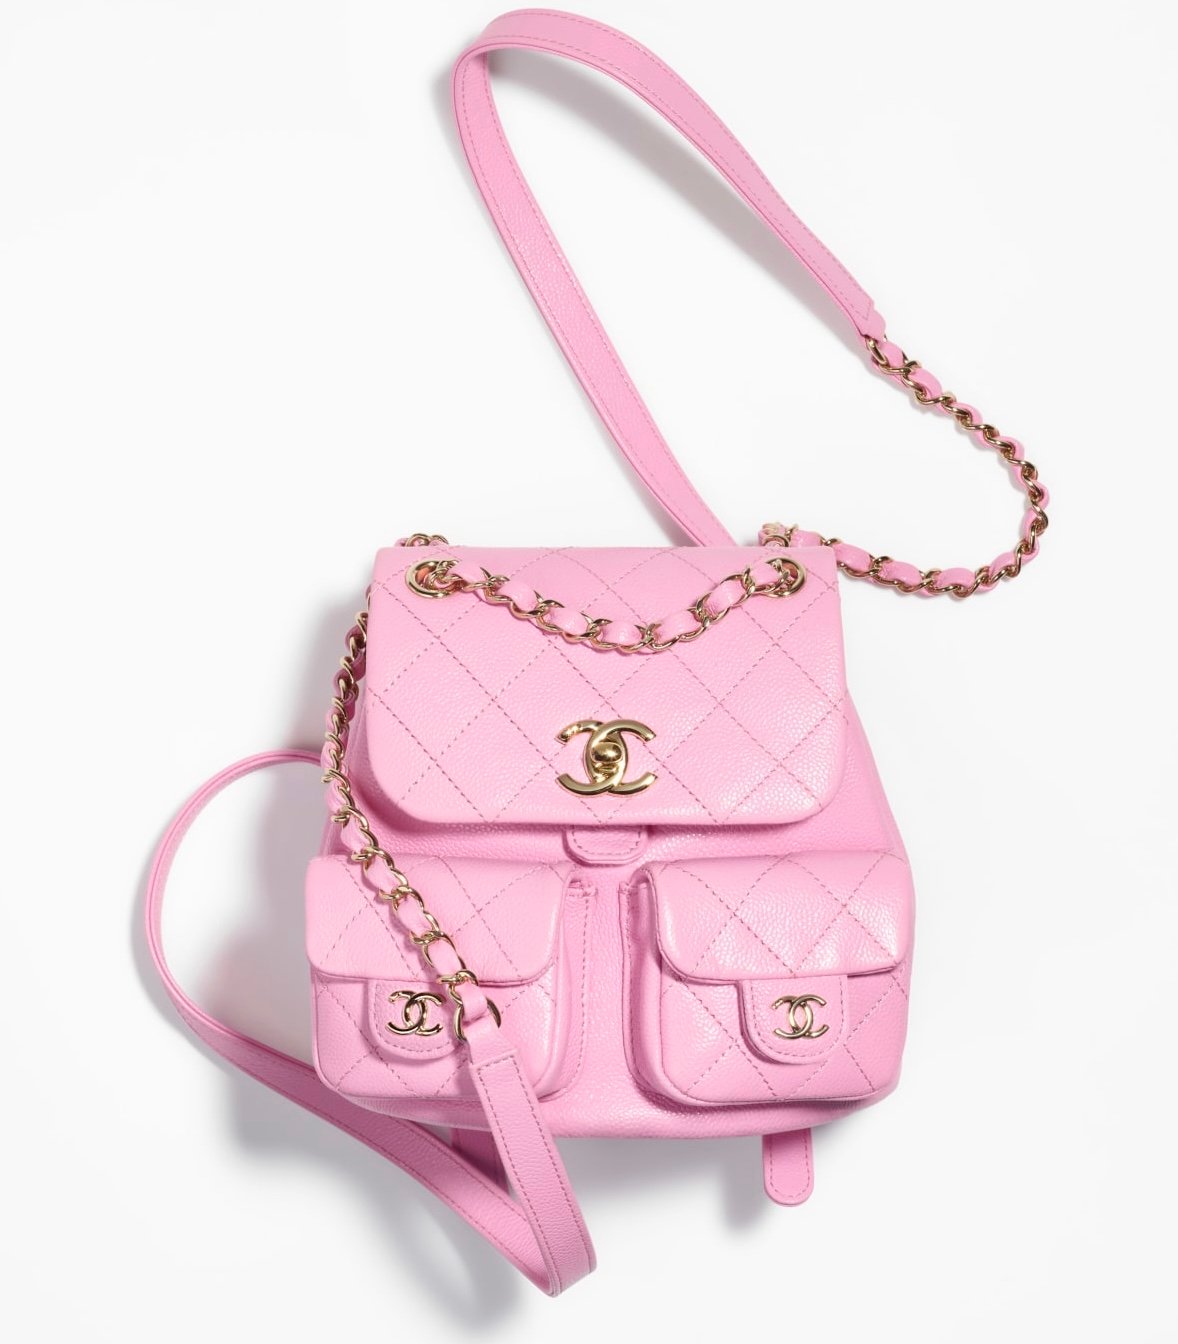 6 of the Biggest Bag Trends From the Spring 2023 Runways  Fashion Chanel  flap bag Chanel bag